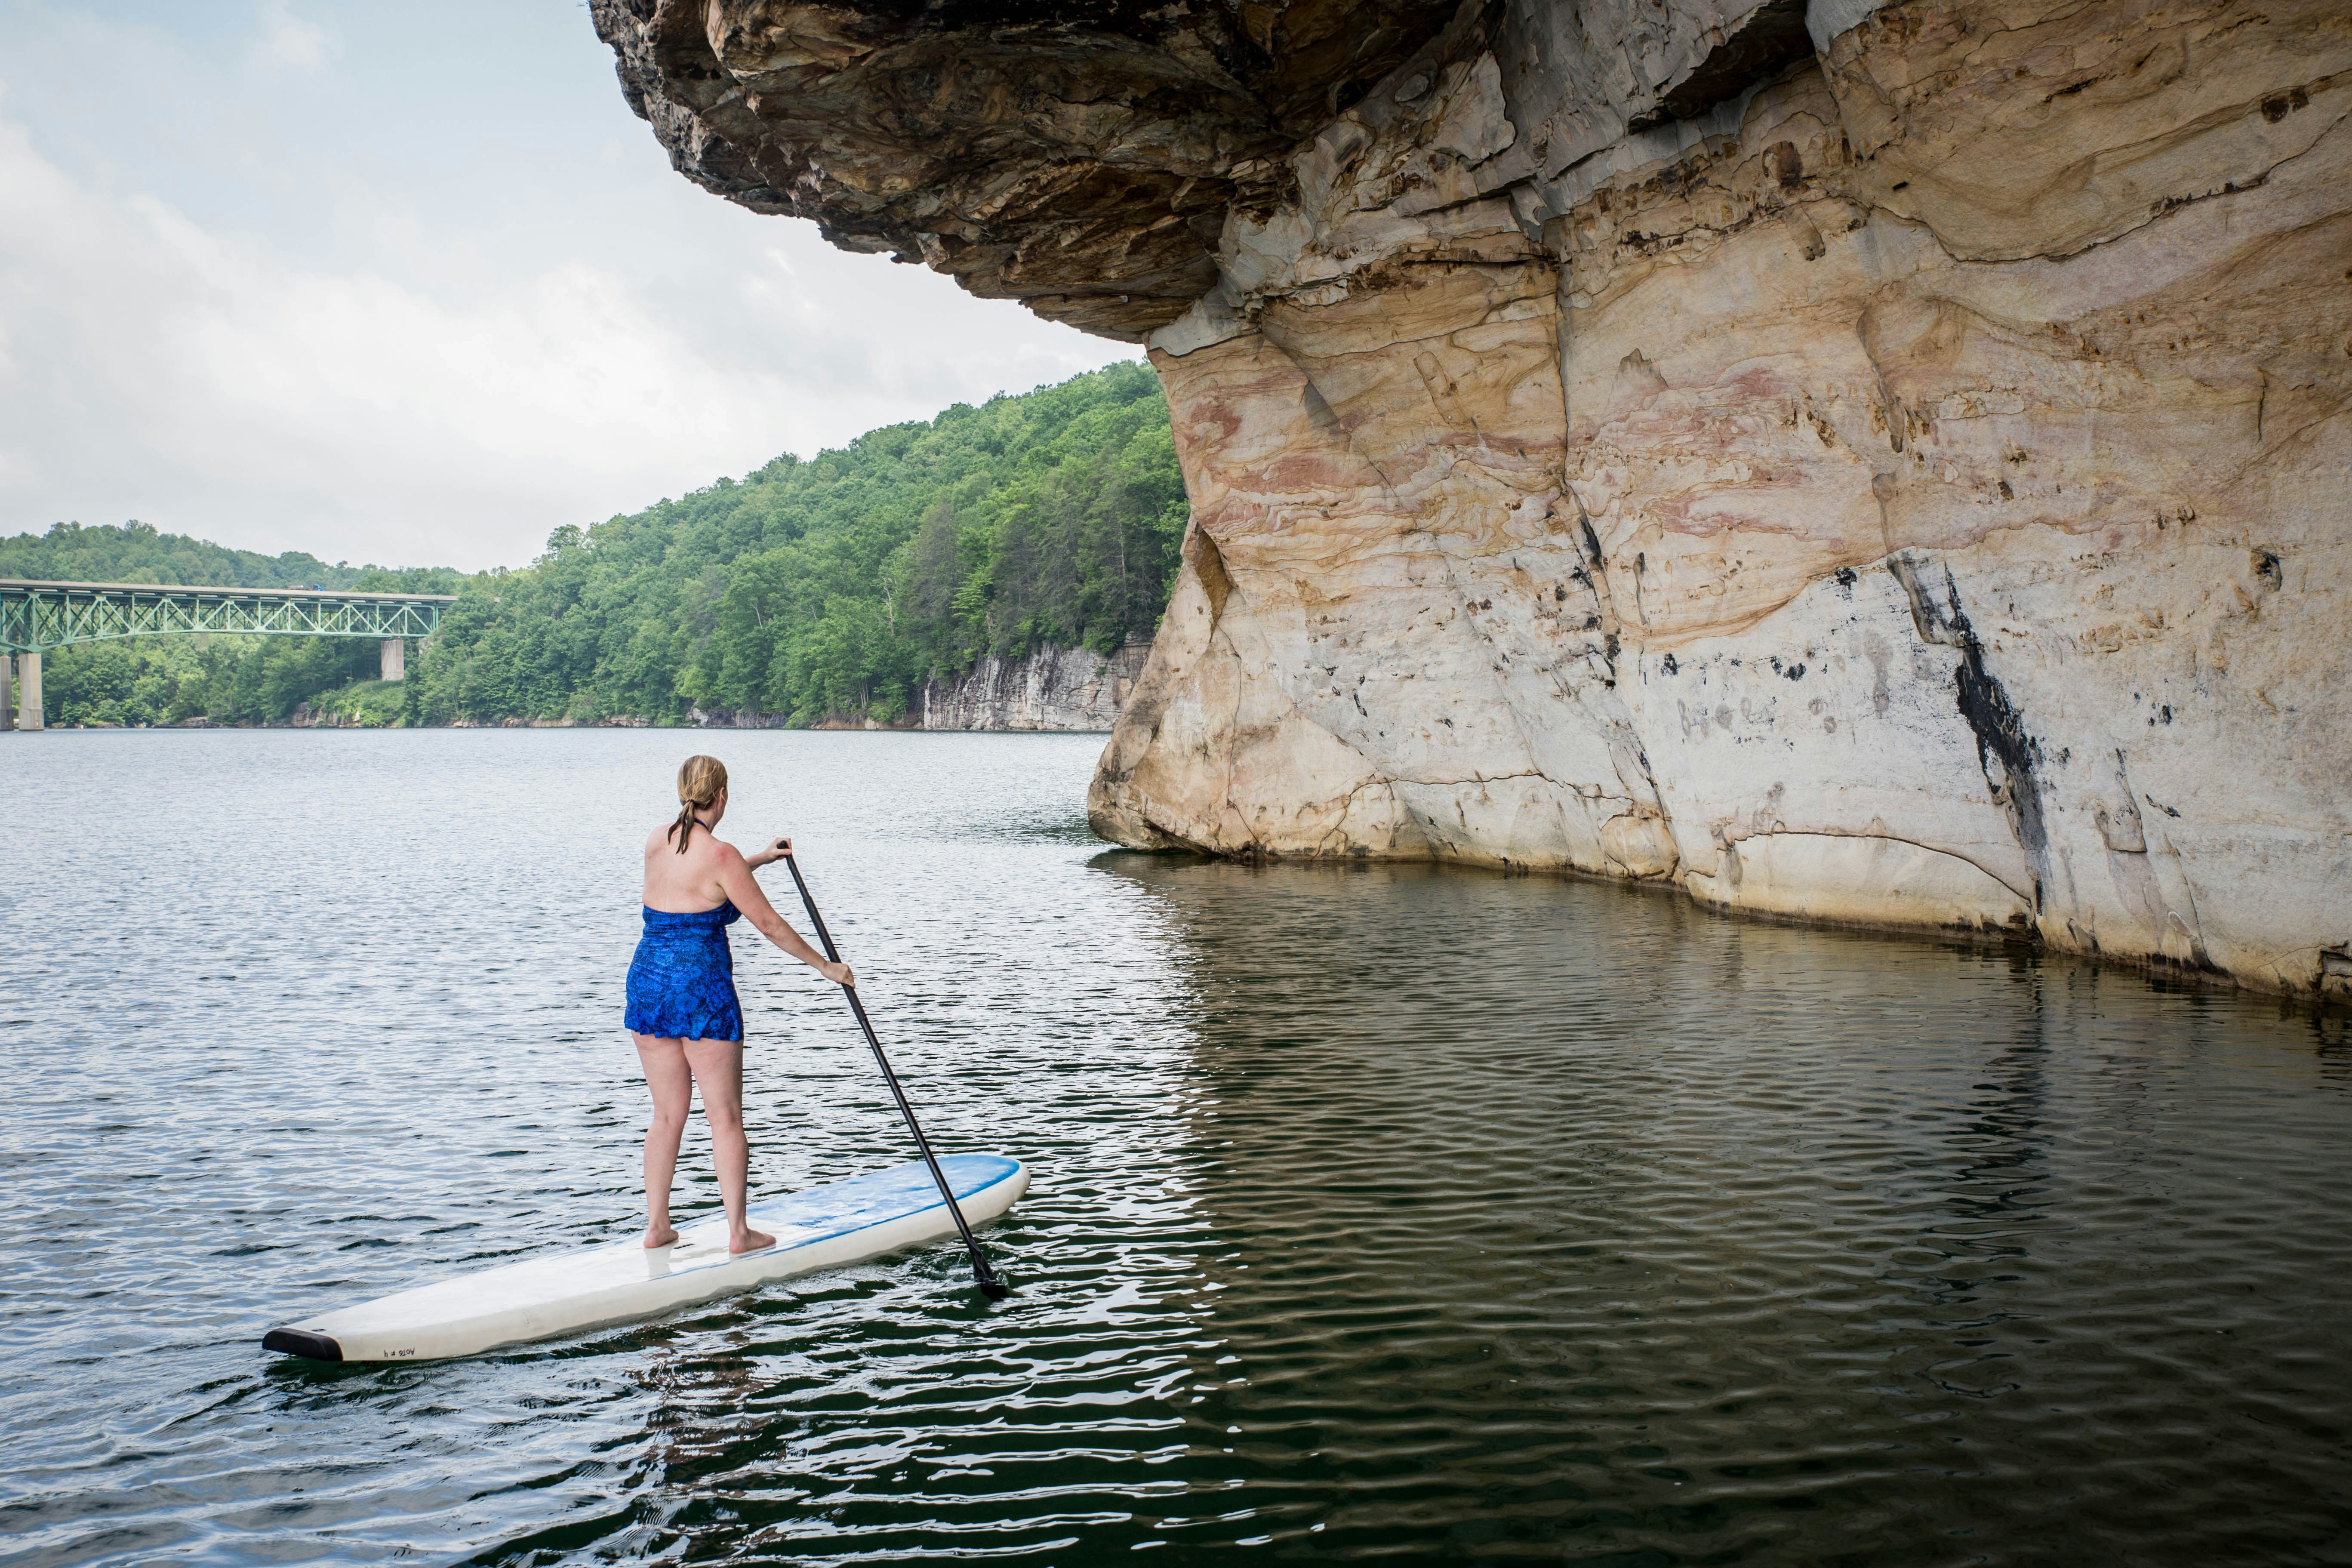 A woman paddleboards through calm waters at Summersville Lake, beneath a cliff face. To the left, the New River Gorge bridge is visible.